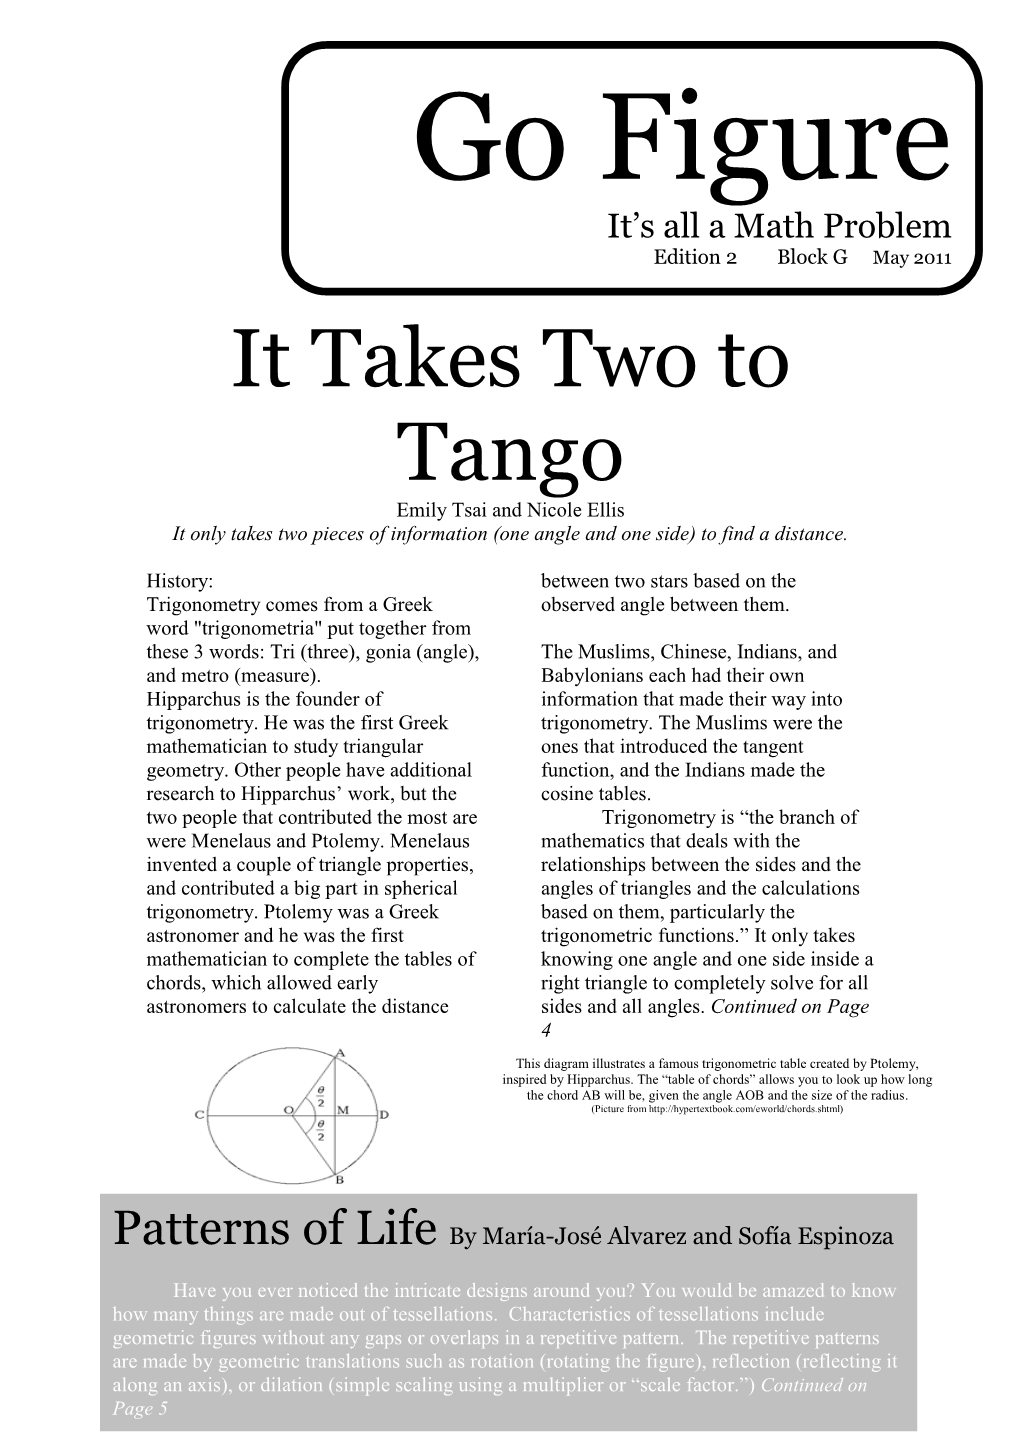 It Takes Two to Tango Emily Tsai and Nicole Ellis It Only Takes Two Pieces of Information (One Angle and One Side) to Find a Distance